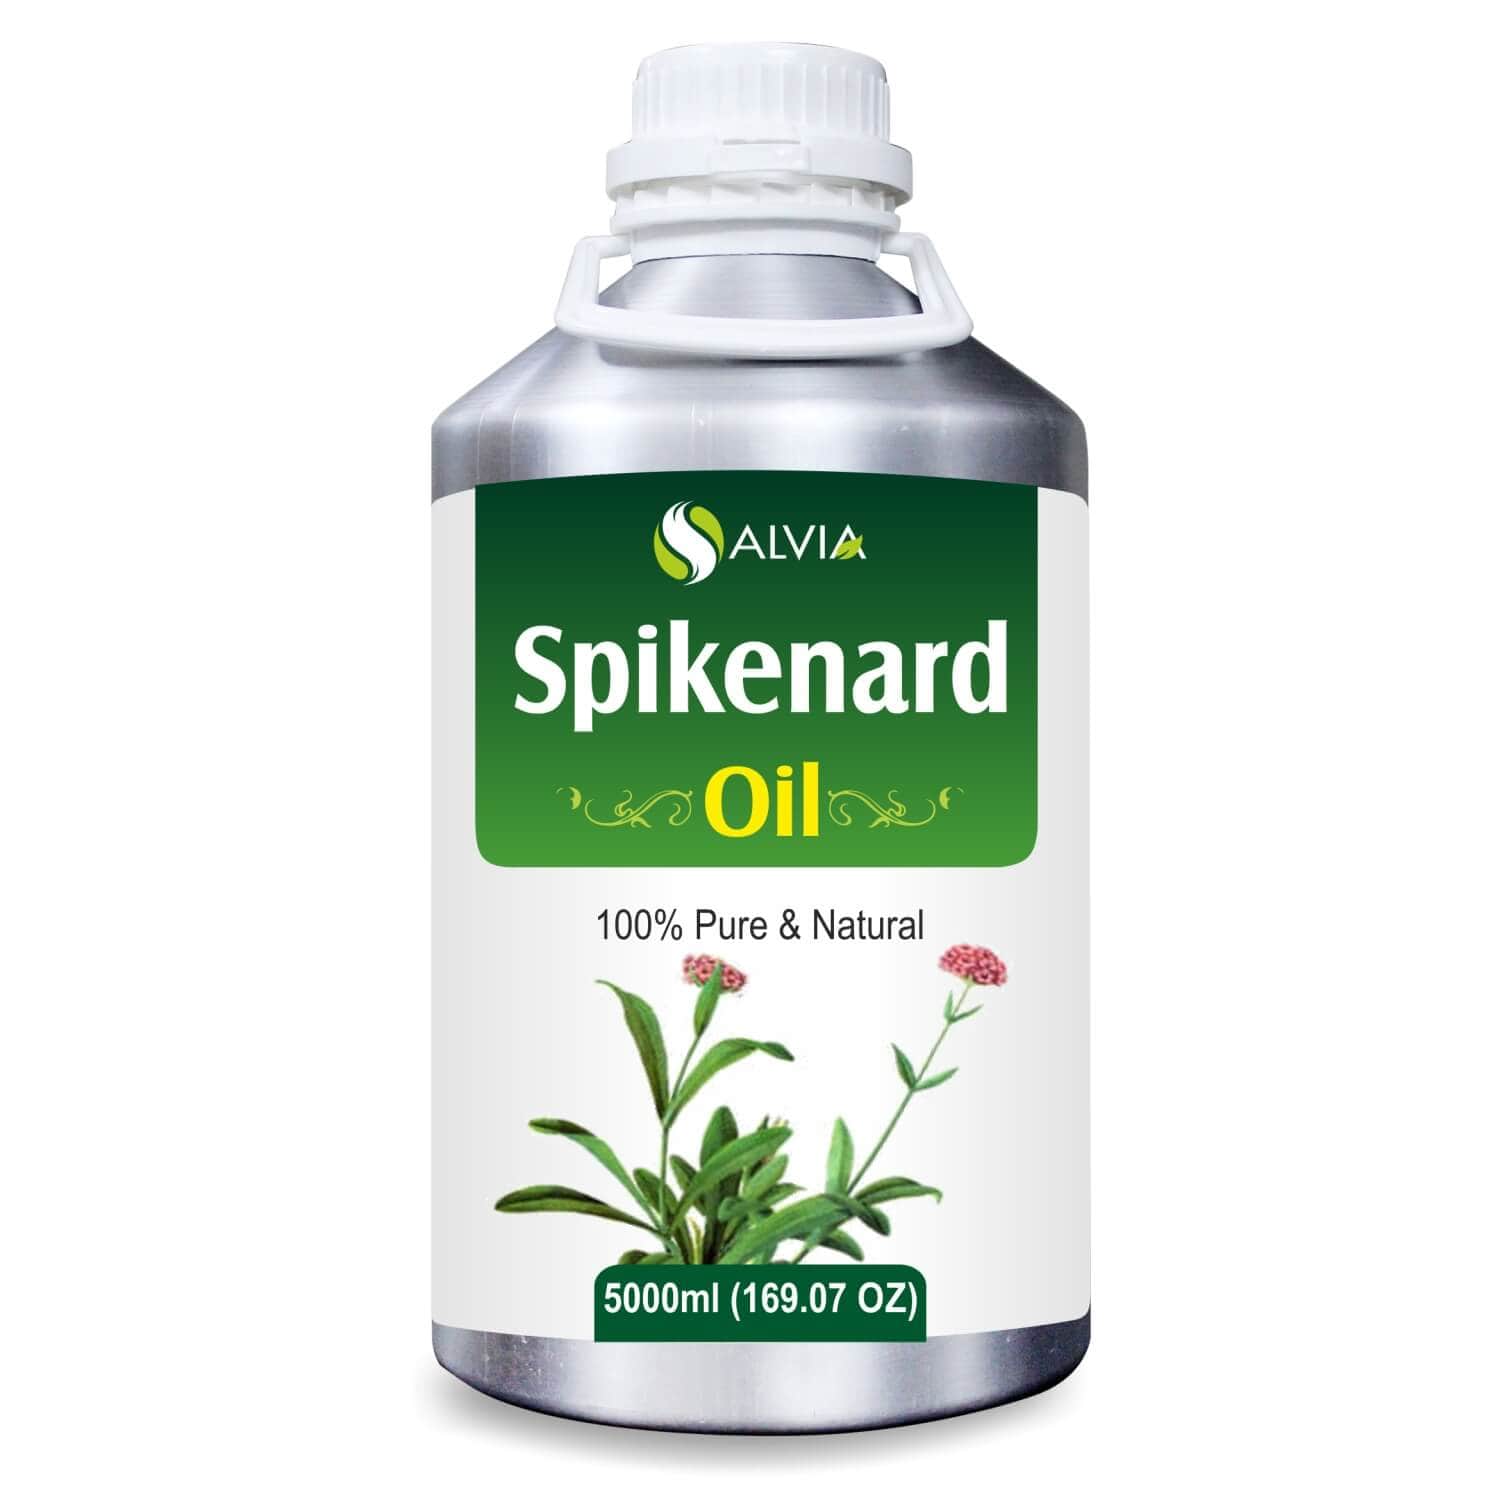 Salvia Natural Essential Oils 5000ml Spikenard Oil (Nardostachys jatamansi) Natural Essential Oil Anti Inflammatory Reduce Stress Relief Muscle & Pain, Skincare, Best For Aromatherapy